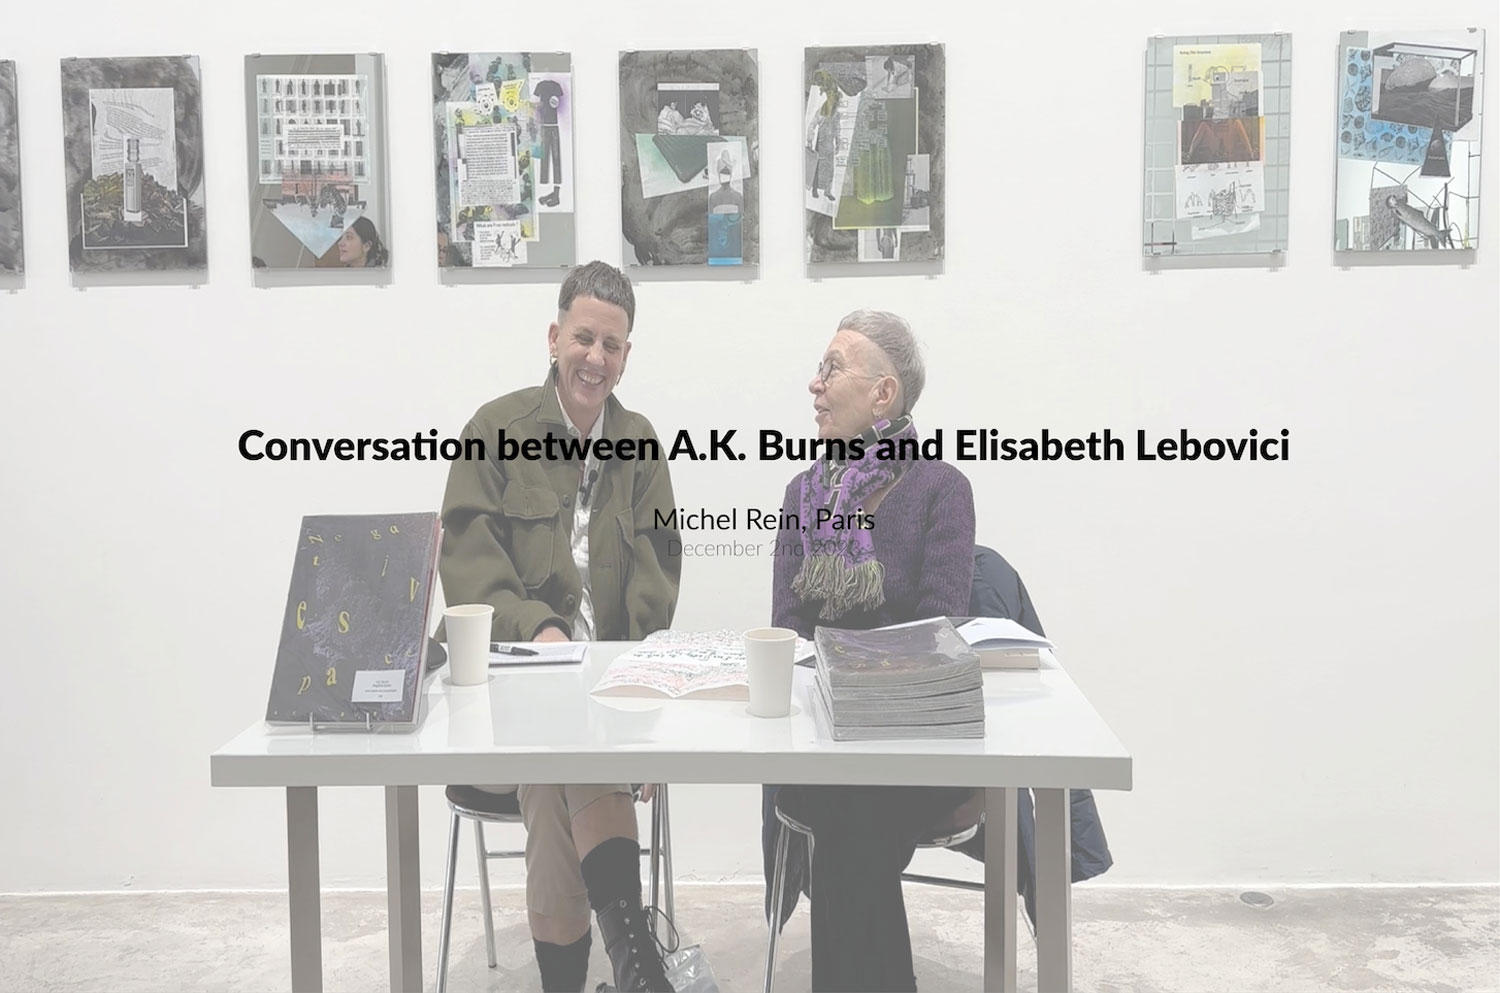 A.K. Burns in conversation with Elisabeth Lebovici